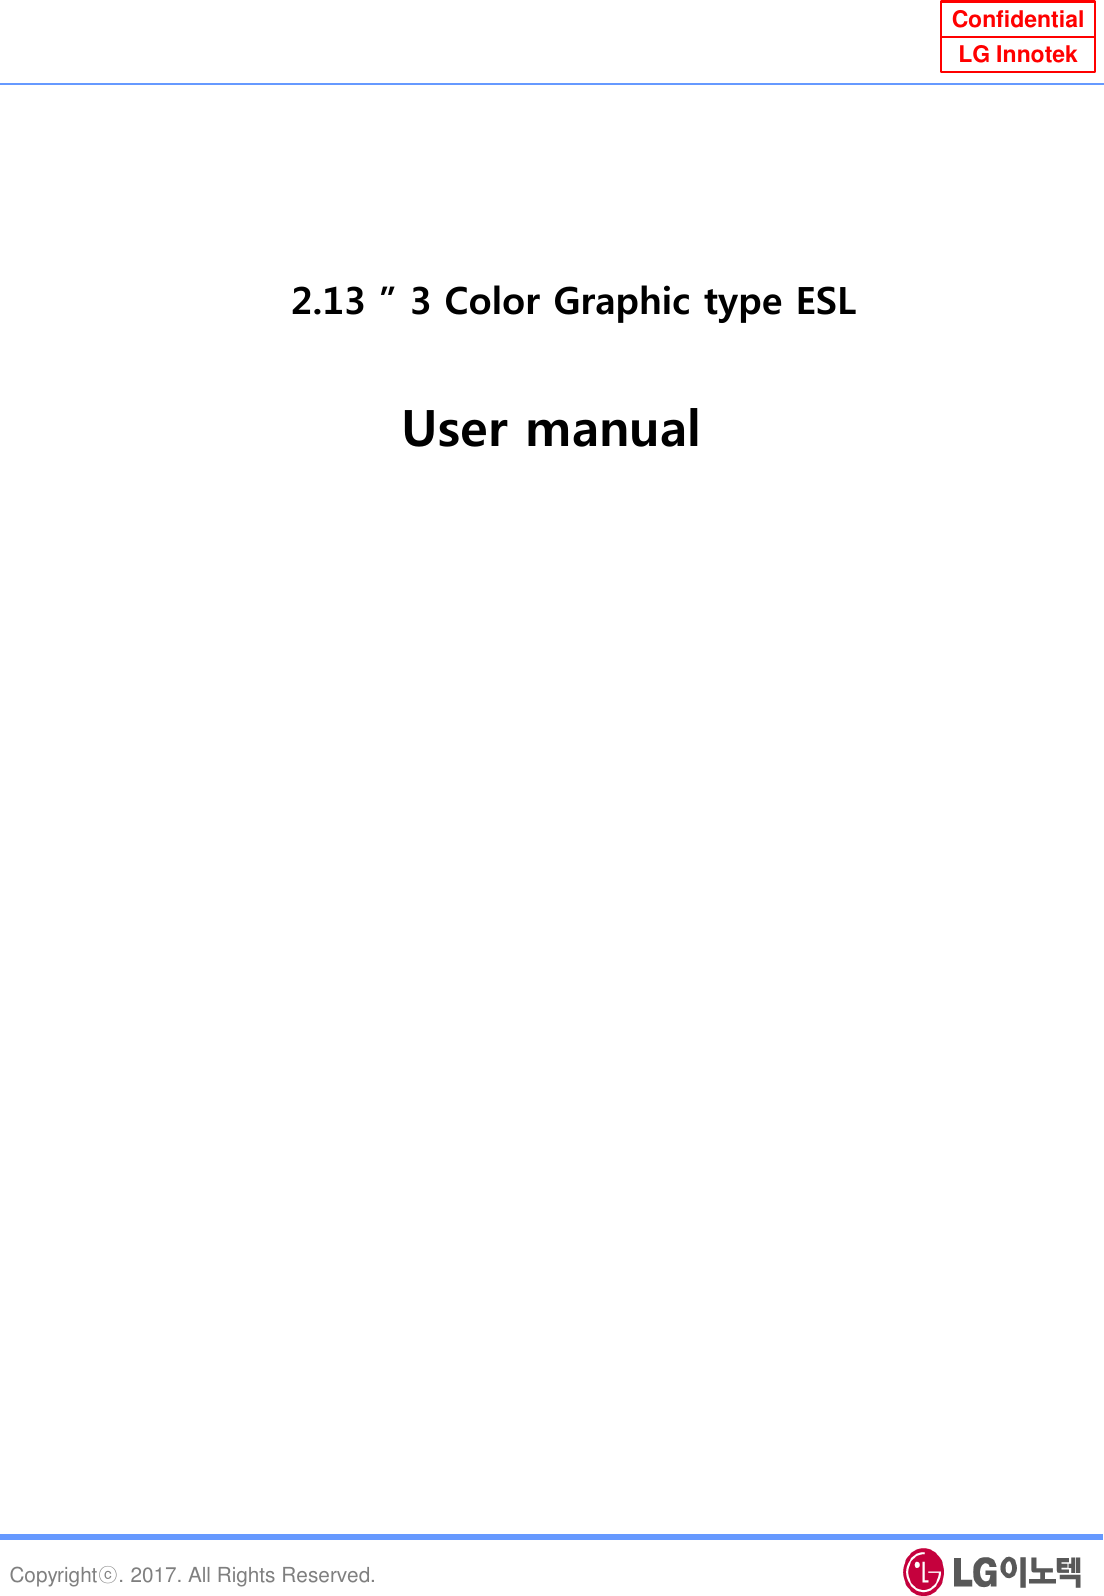 Copyrightⓒ. 2017. All Rights Reserved. Confidential LG Innotek 2.13 ” 3 Color Graphic type ESL User manual 